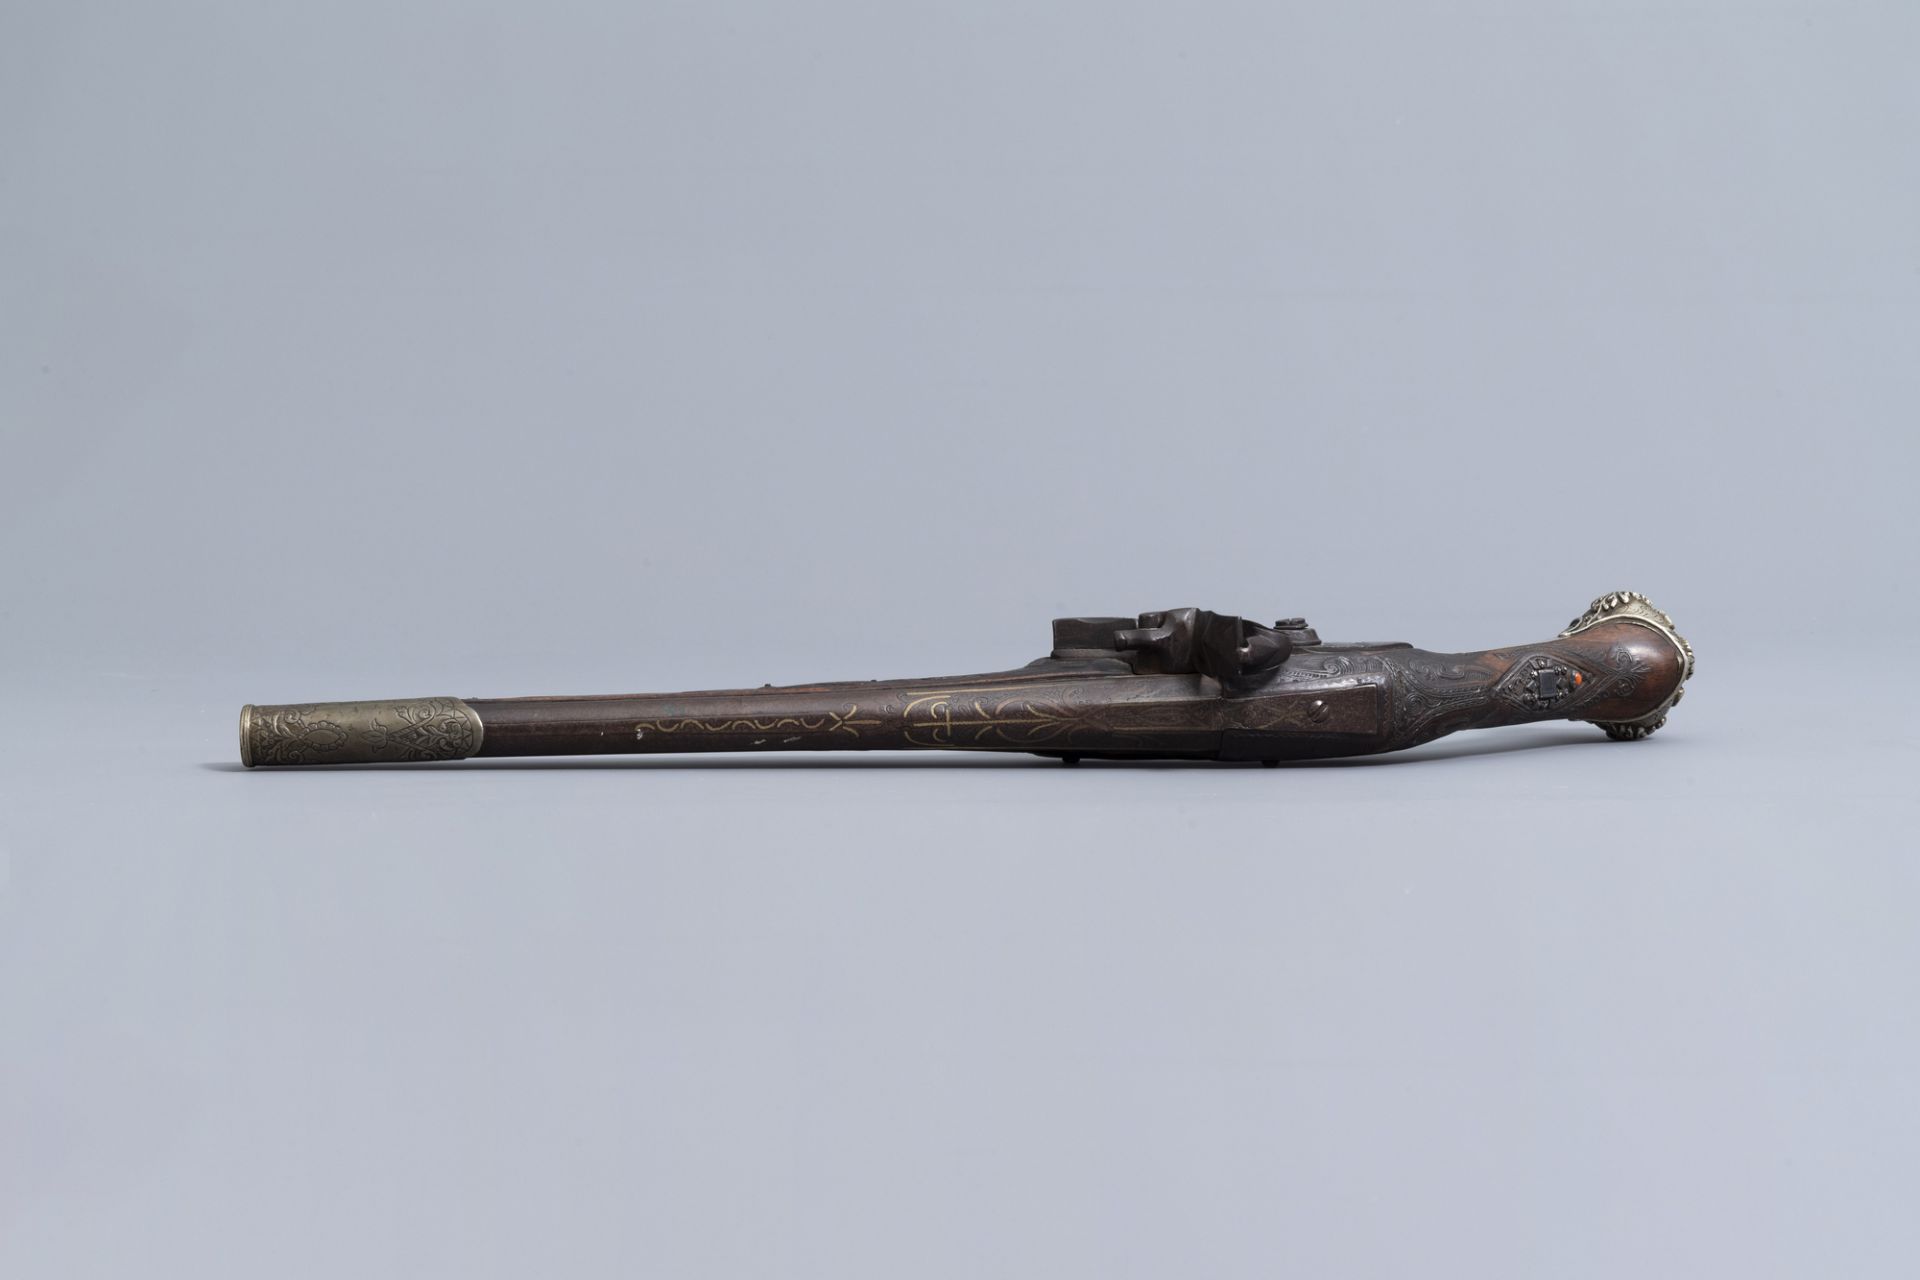 An Ottoman coral inlaid and silver mounted flintlock pistol, Algeria, 18th C. - Image 4 of 12